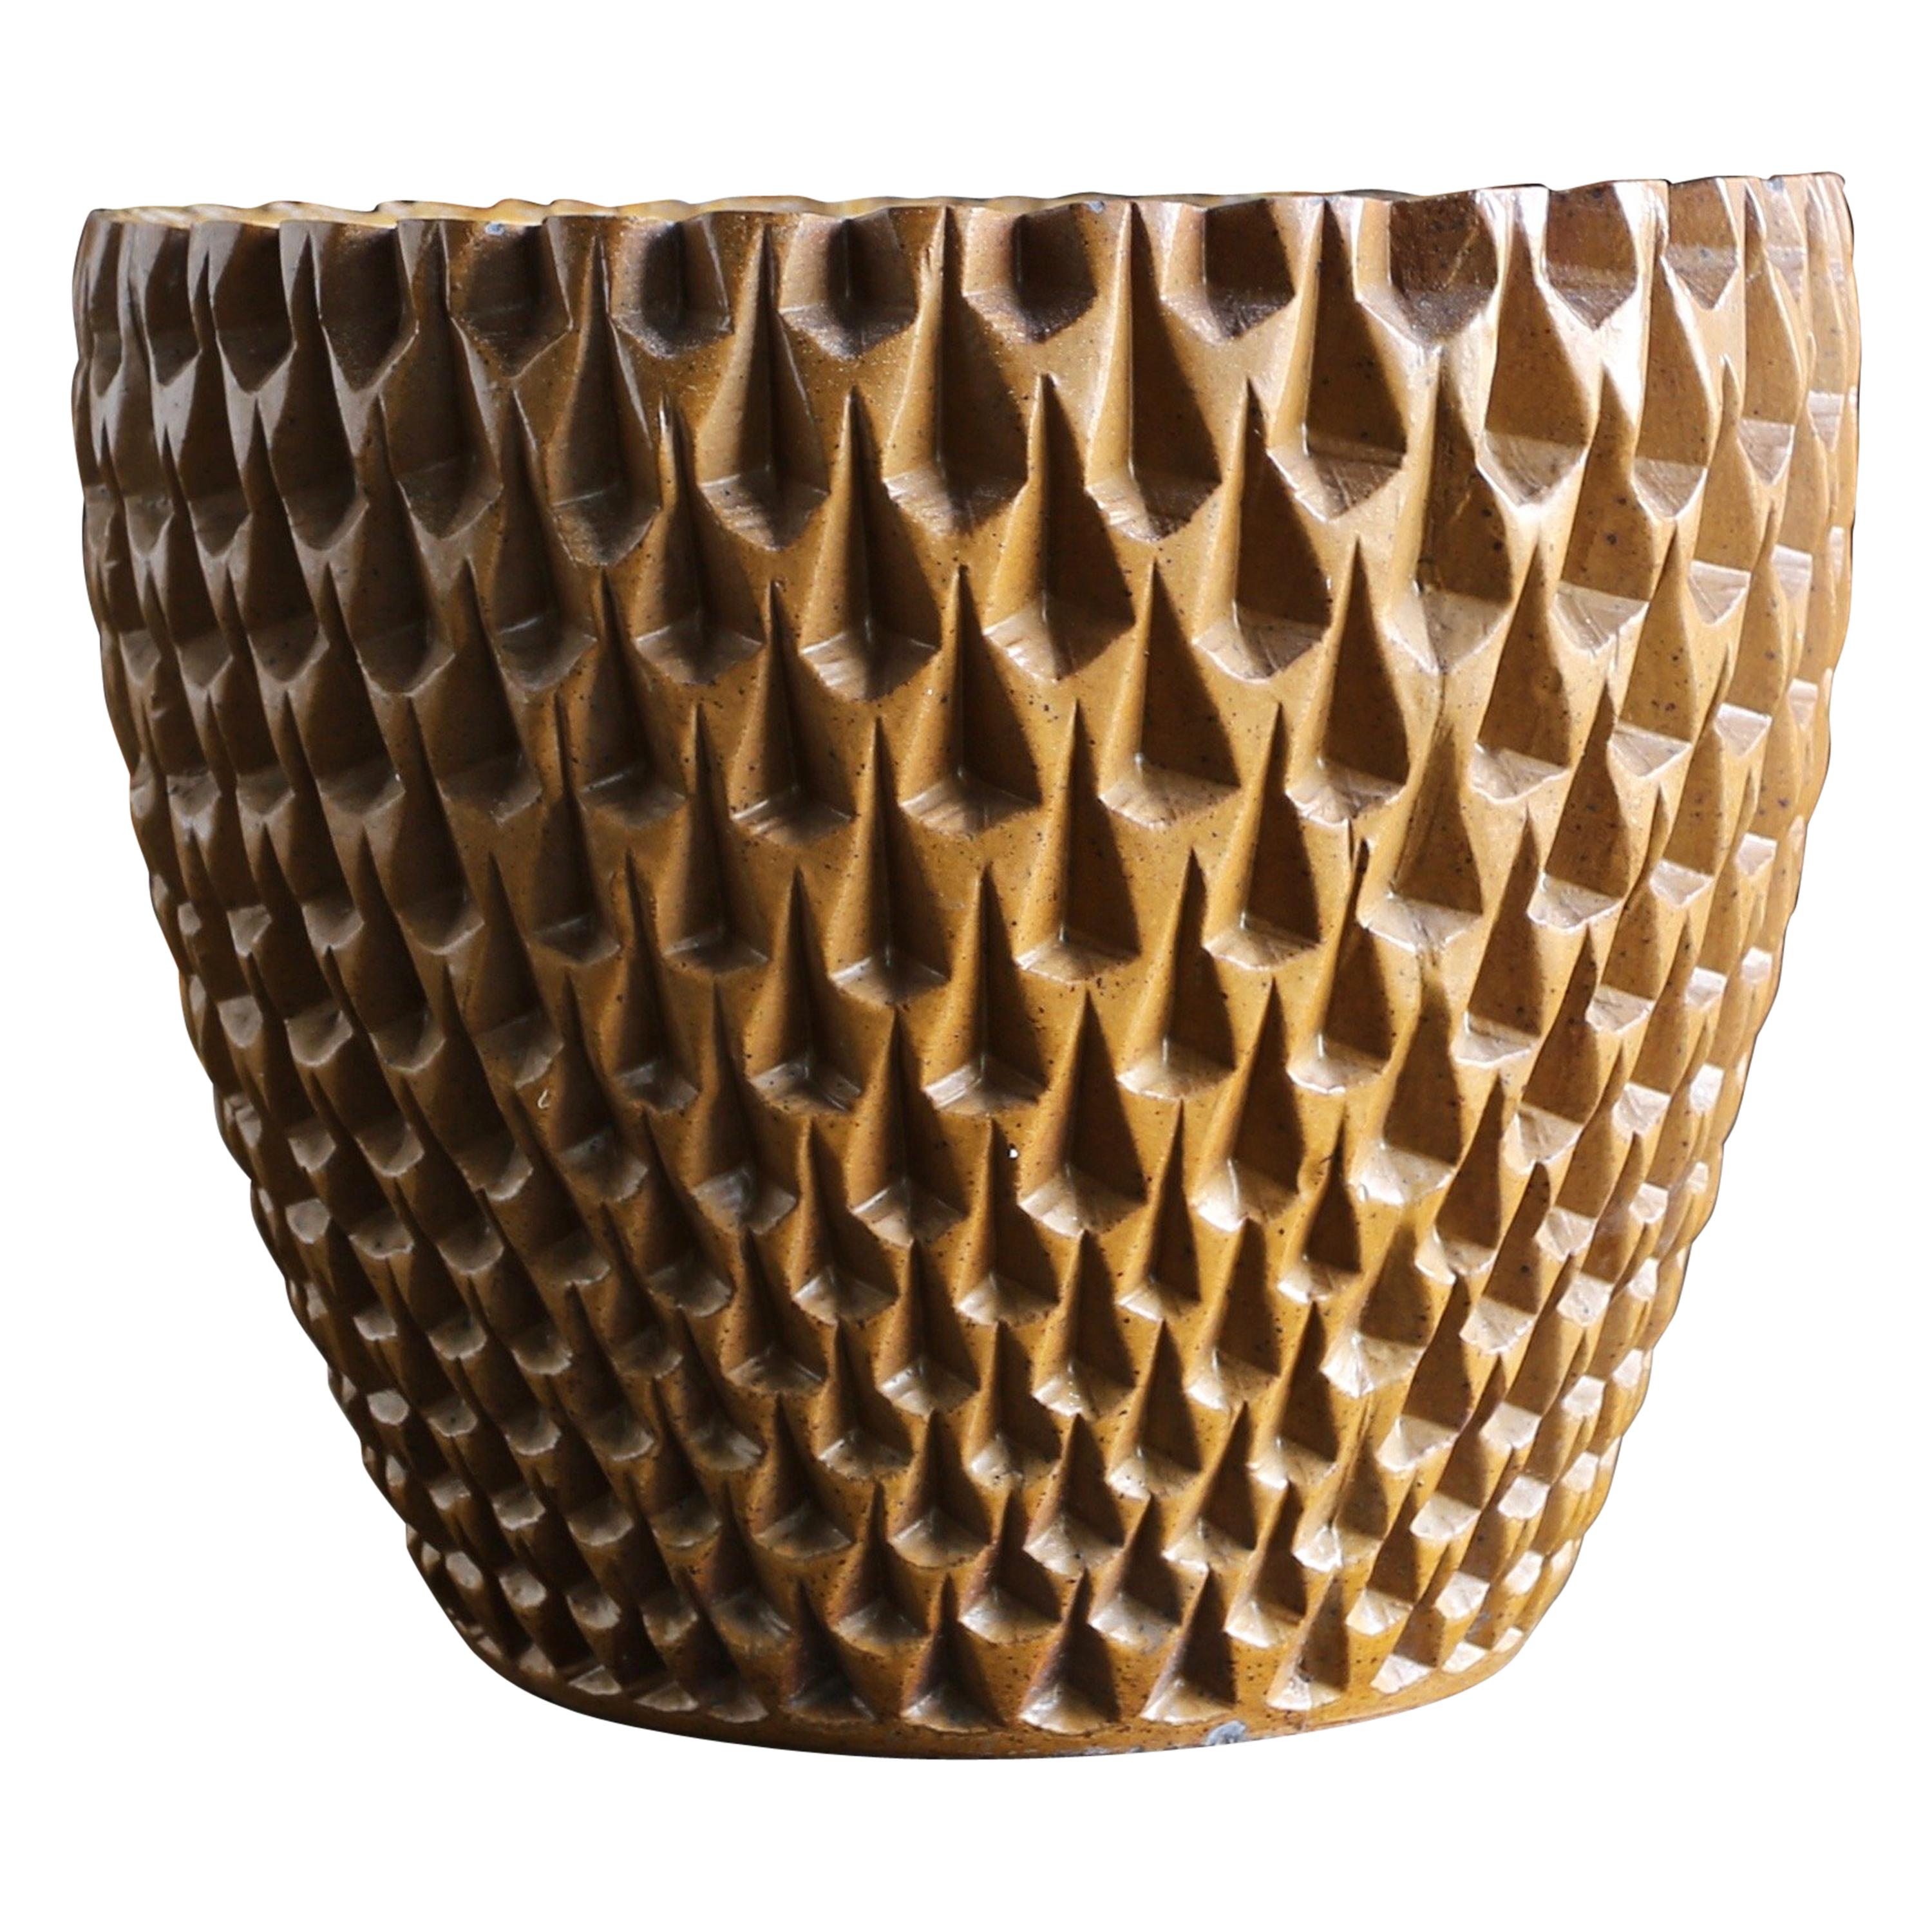 Phoenix Planter by David Cressey for Architectural Pottery, circa 1963